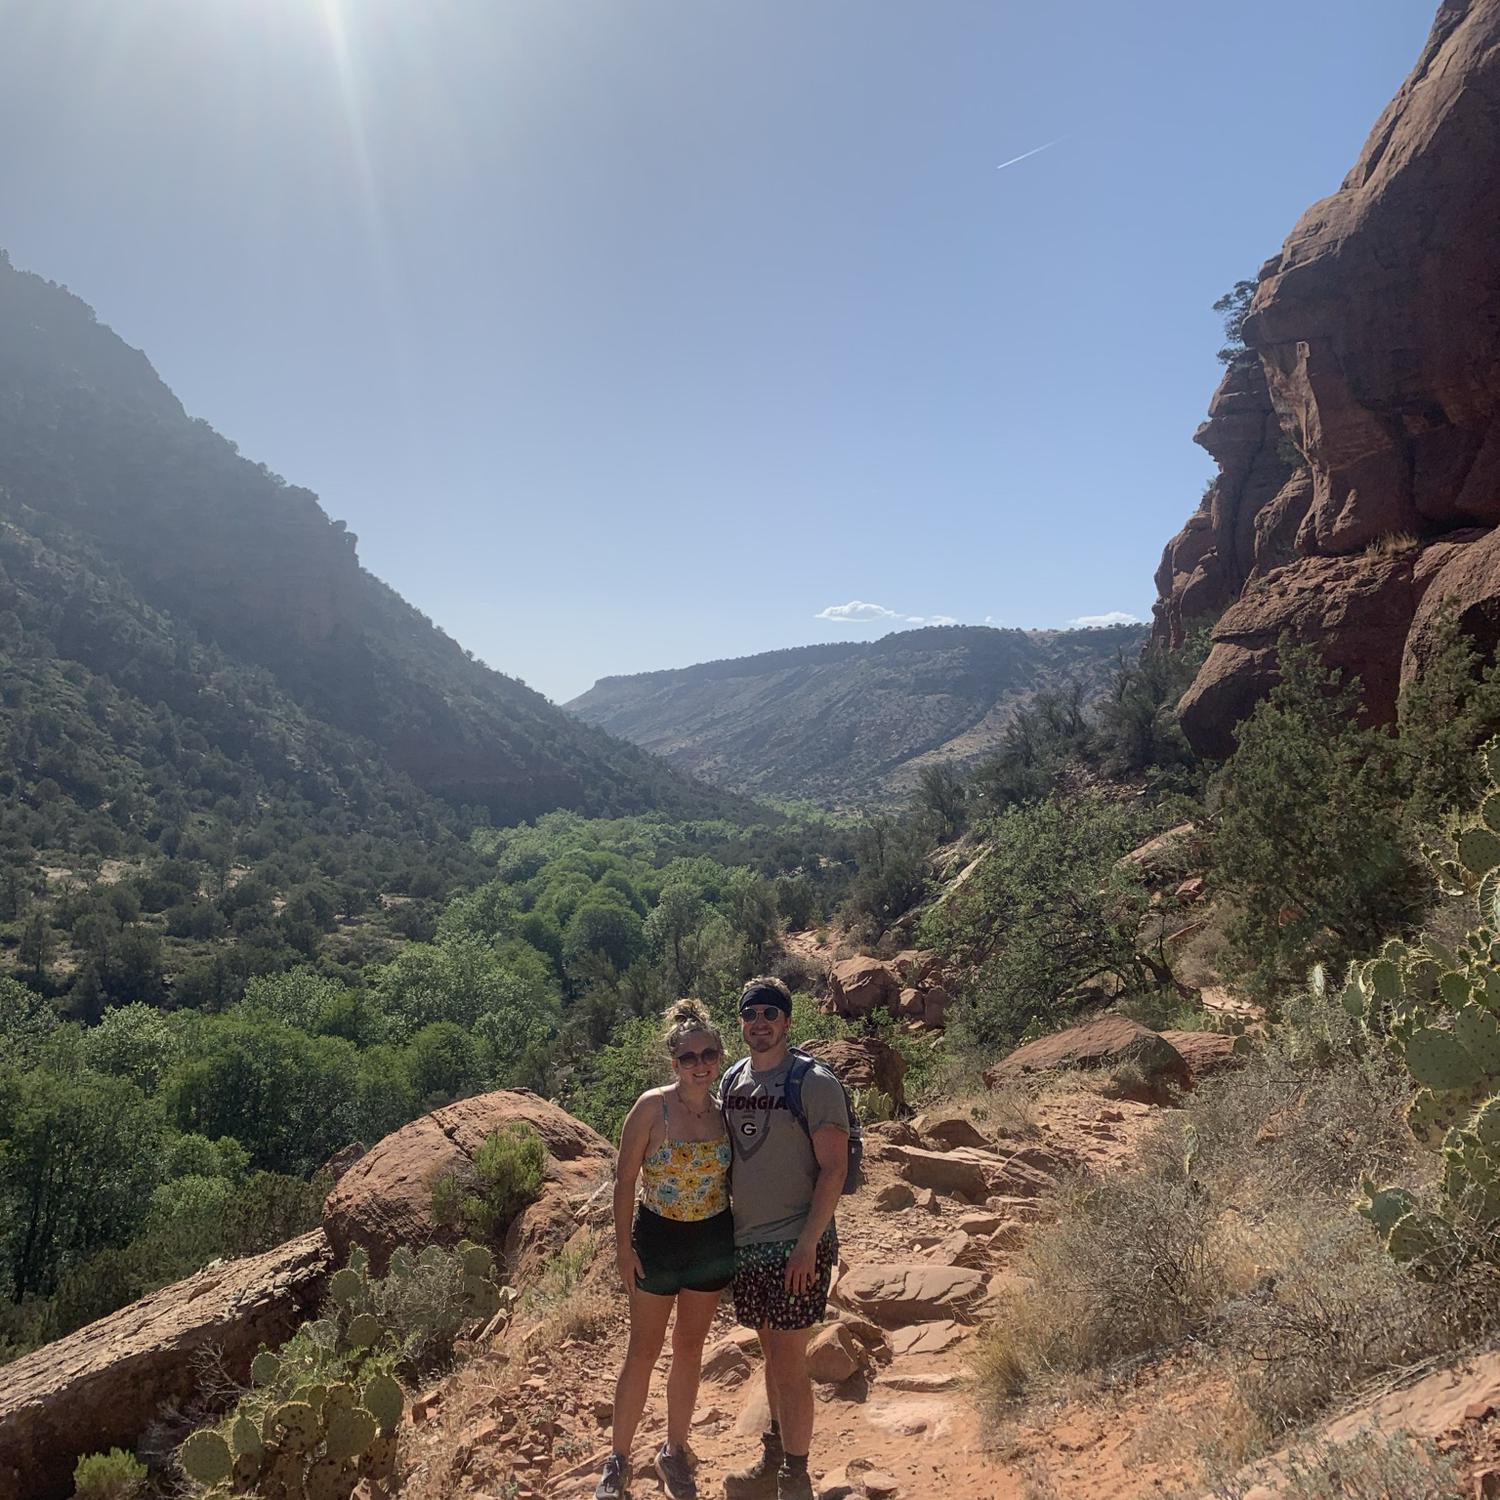 May 2021: Bess doesn't enjoy hiking, but we love visiting Tyler and Mary Jo in Arizona!